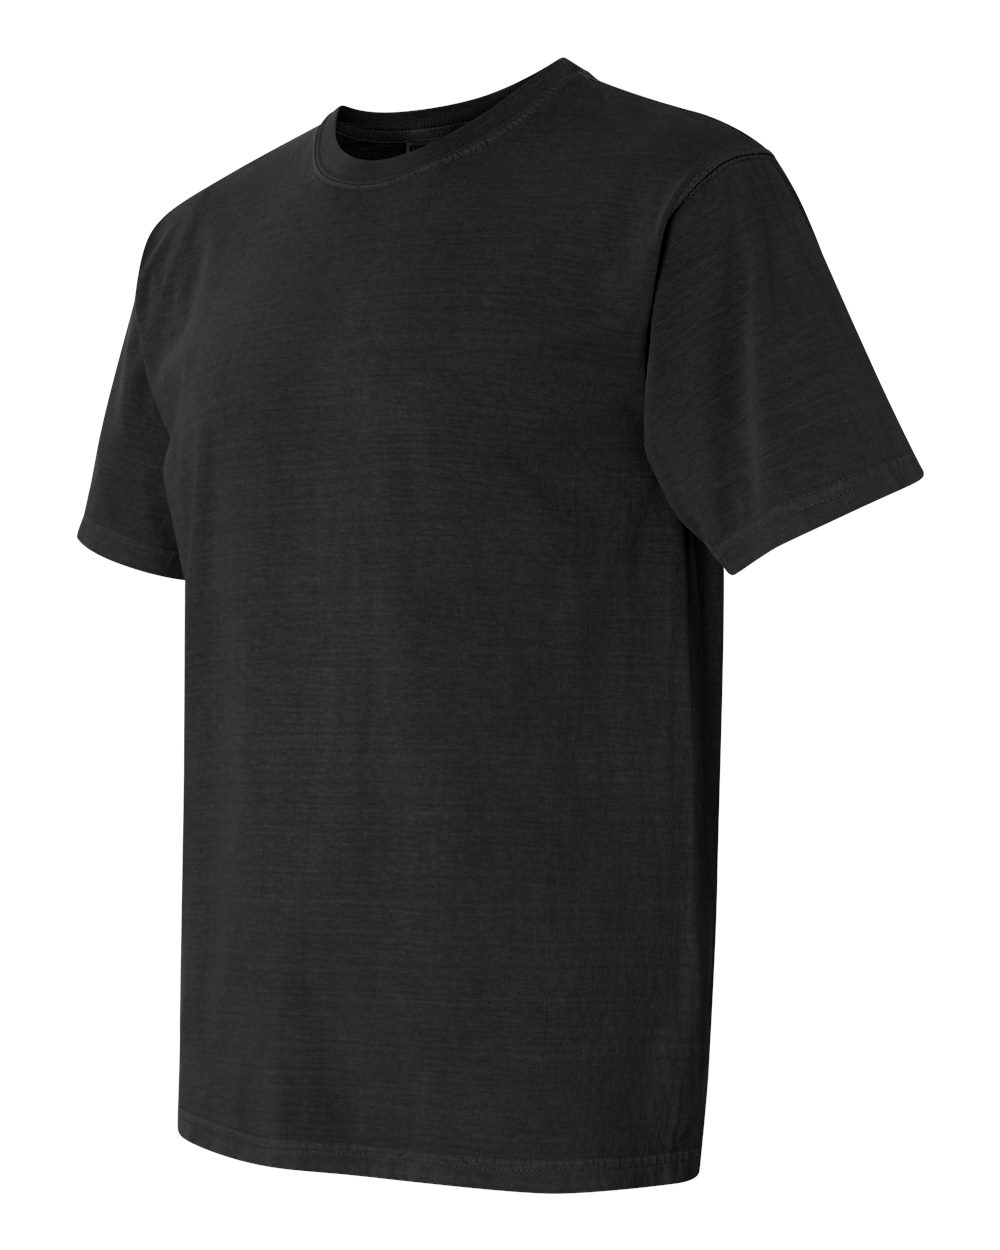 fully customizable comfort colors heavyweight short sleeve tee shirt for your brand in multiple colors